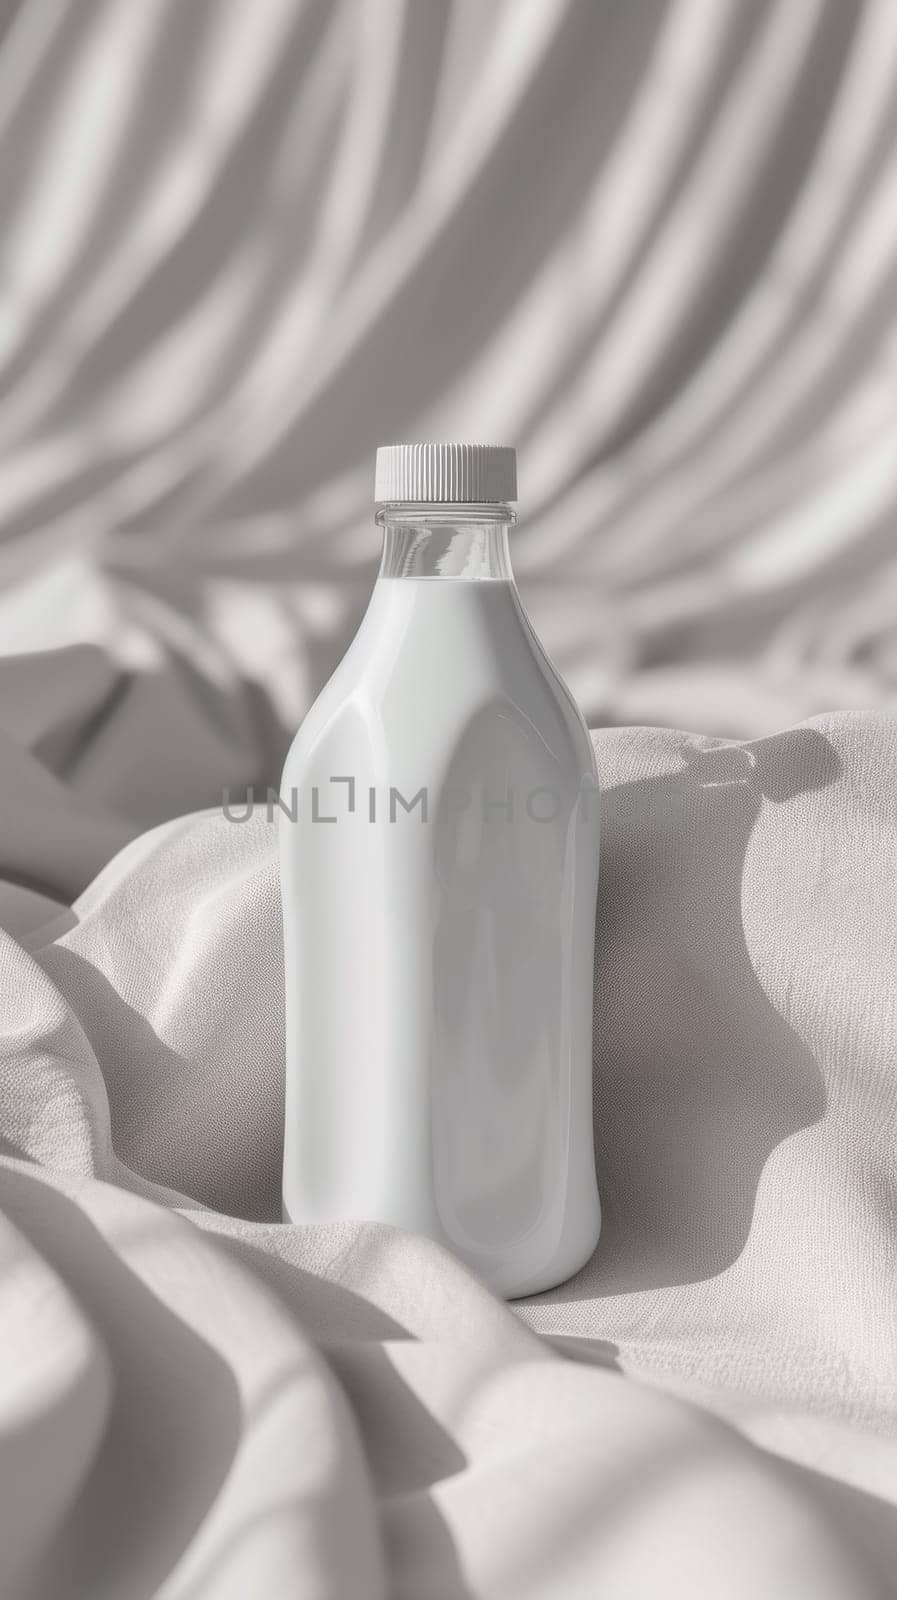 A bottle of milk on a white sheet with some fabric